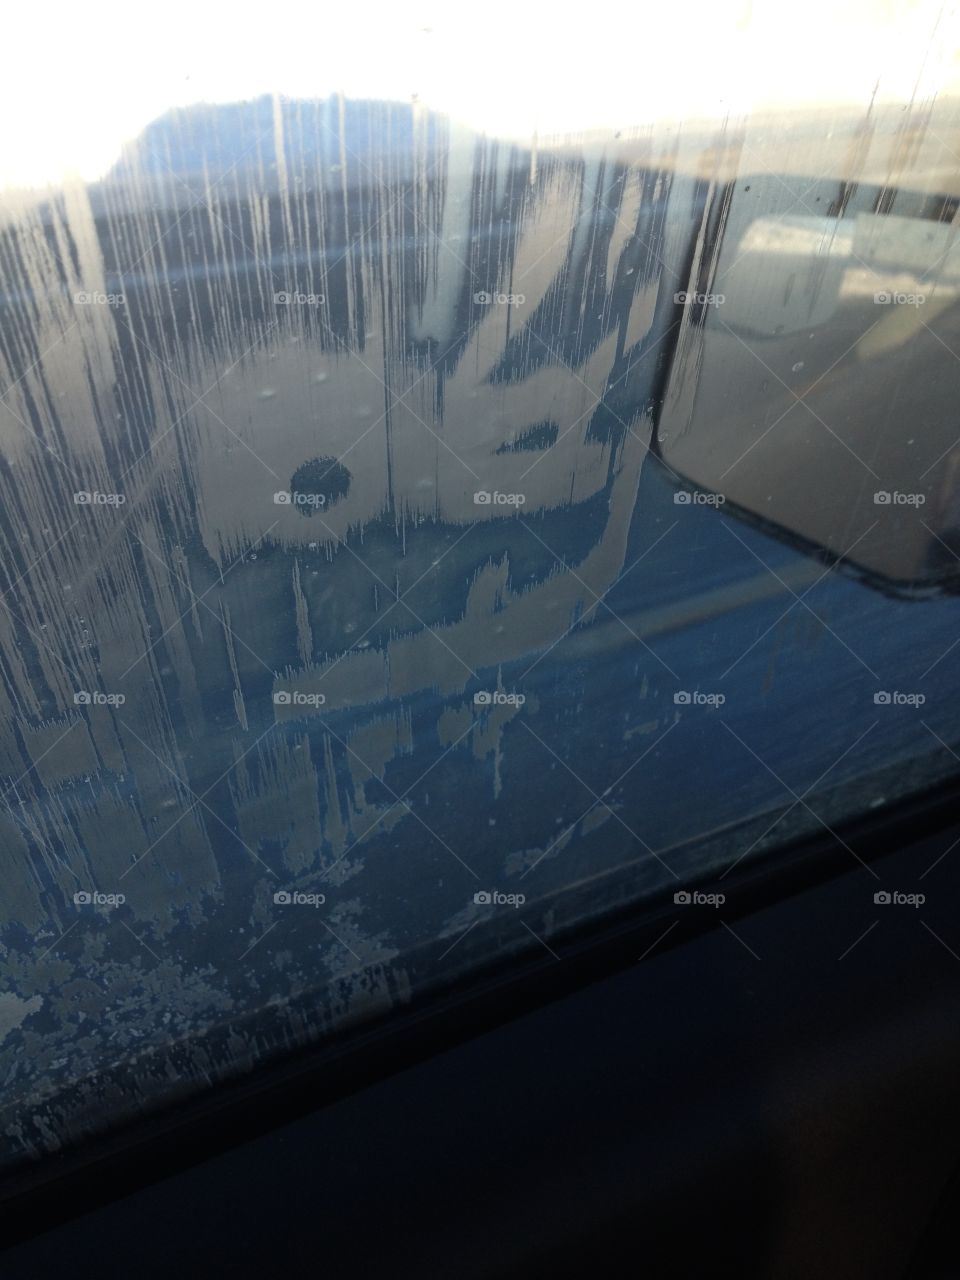 Naturally formed frost monster on car window